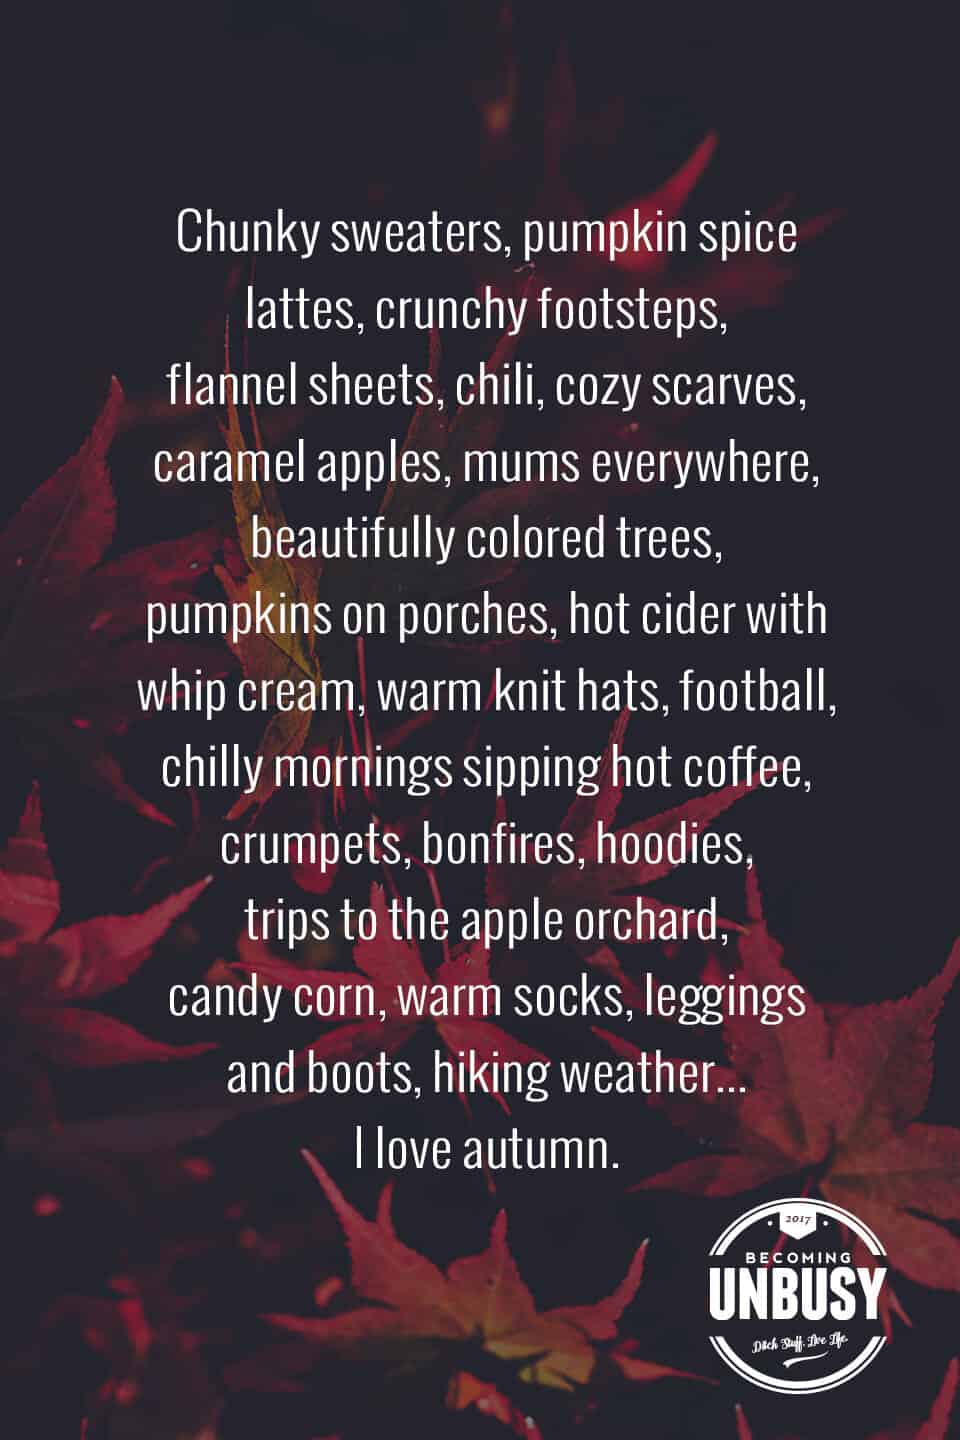 The following fall bucket list quote written over a photo of red autumn leaves, "Chunky sweaters, pumpkin spice lattes, crunchy footsteps, flannel sheets, chili, cozy scarves, caramel apples, mums everywhere, beautifully colored tress, pumpkins on porches, hot cider with whip cream, warm knit hats, football, chilly mornings sipping hot coffee, crumpets, bonfires, hoodies, trips to the apple orchard, candy corn, warm socks, leggings and boots, hiking weather... I love autumn."